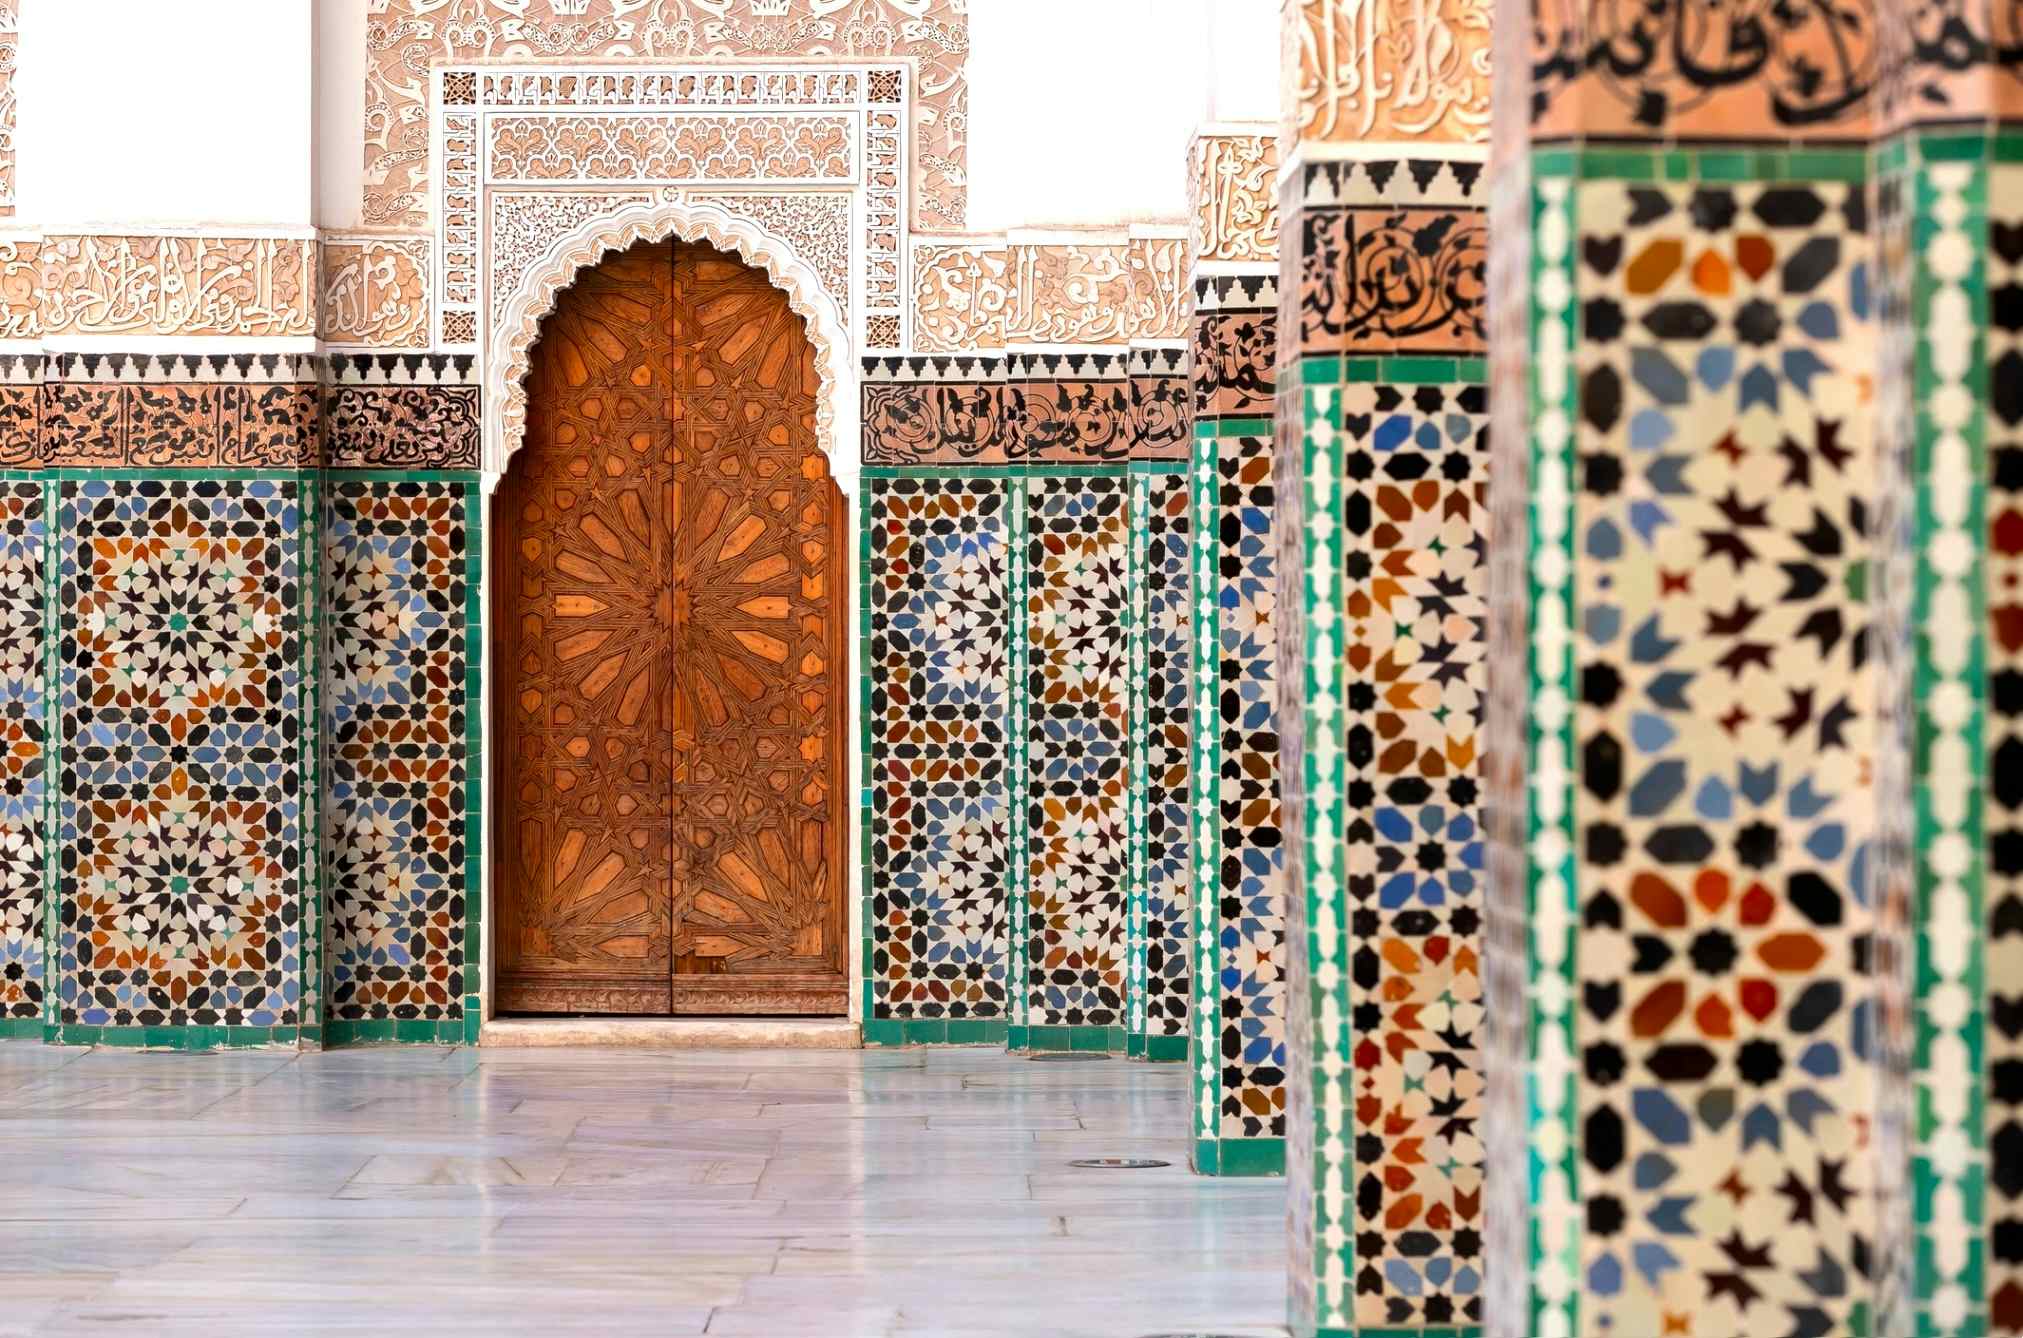 Typical moroccan tiles in the madrasa, Morocco. Photo: GettyImages-1473696412